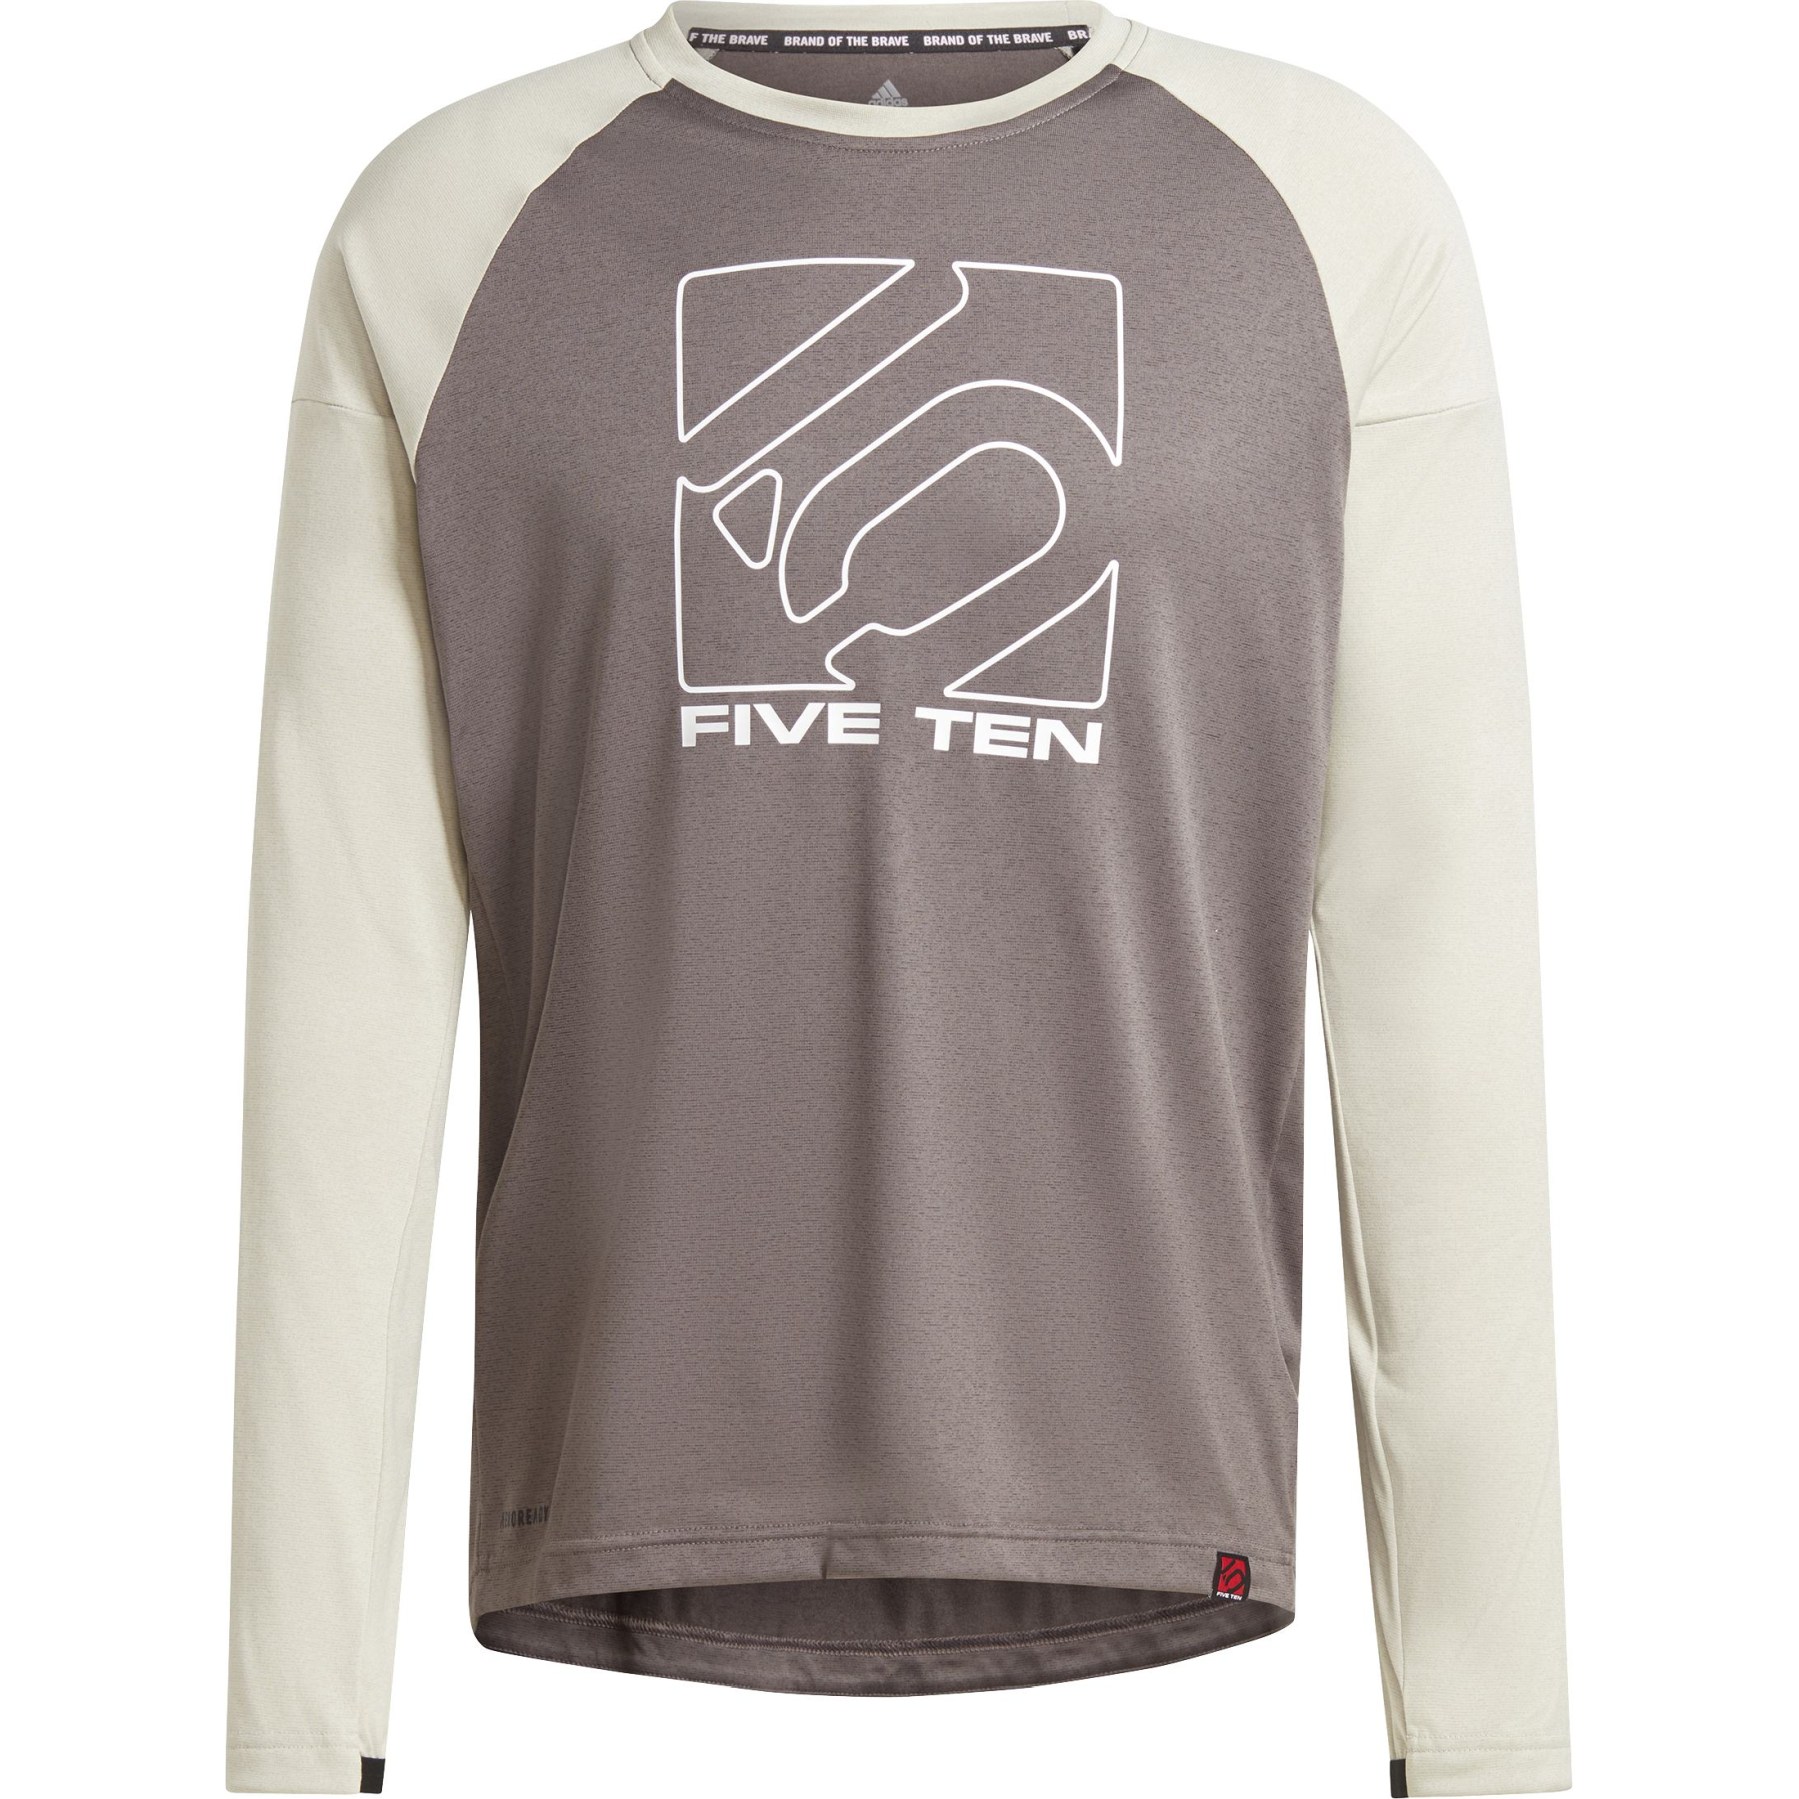 Picture of Five Ten Long Sleeve Jersey - charcoal / putty grey